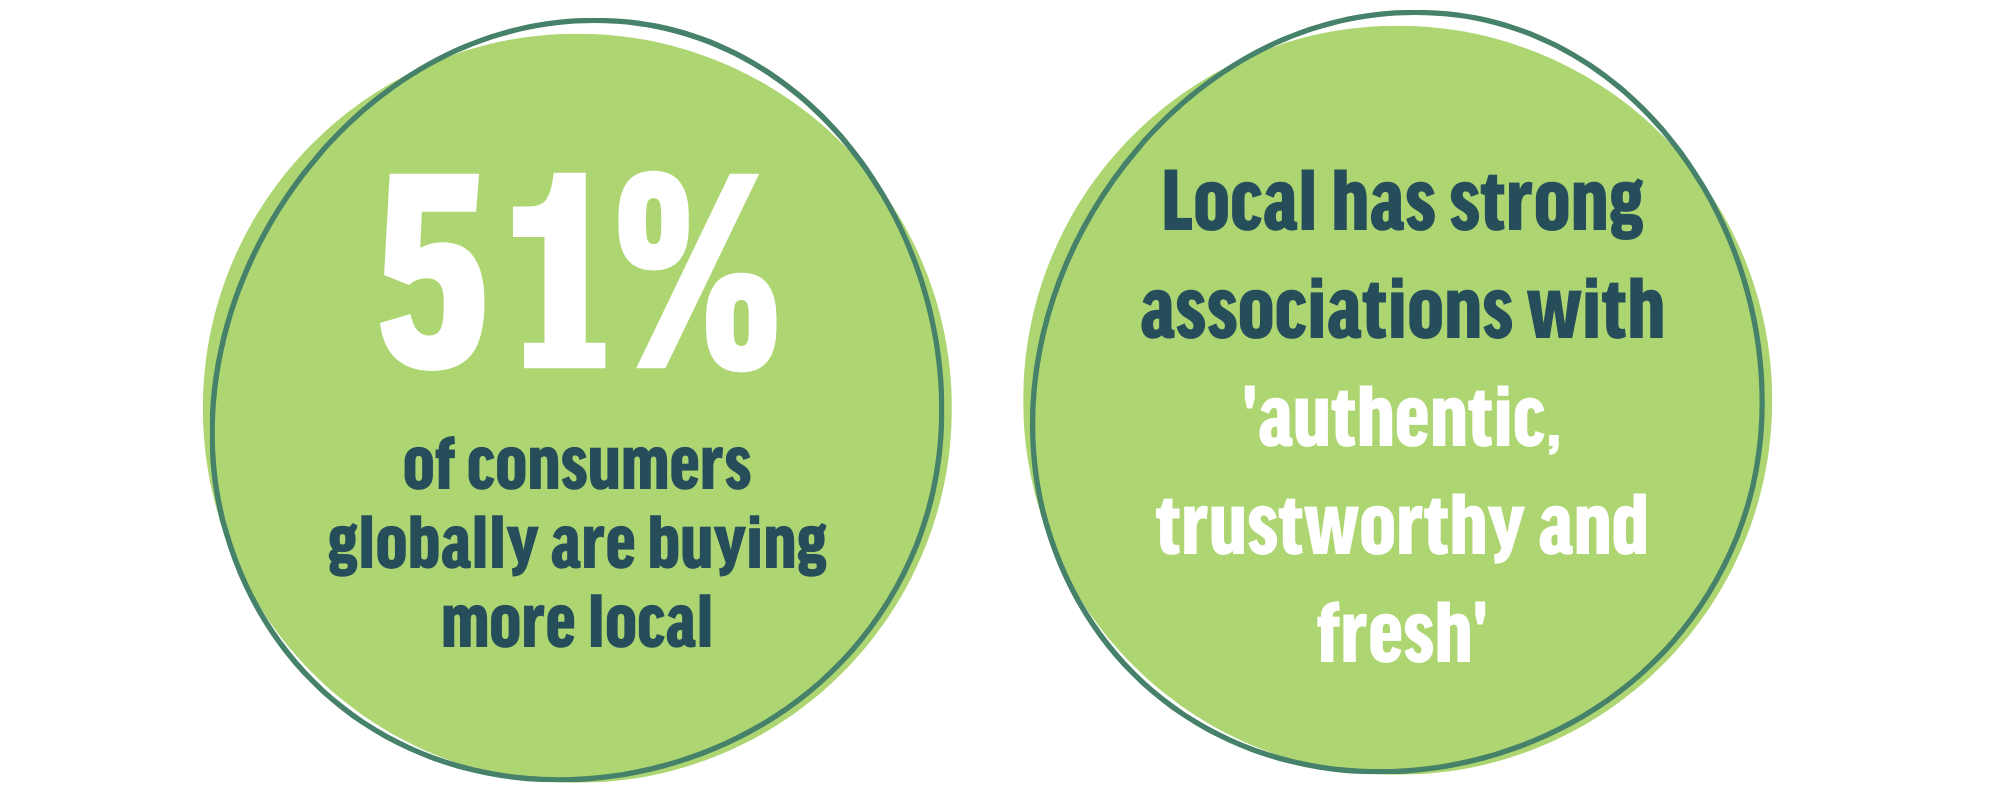 Treatt: 51% consumers globally are buying more local infographic